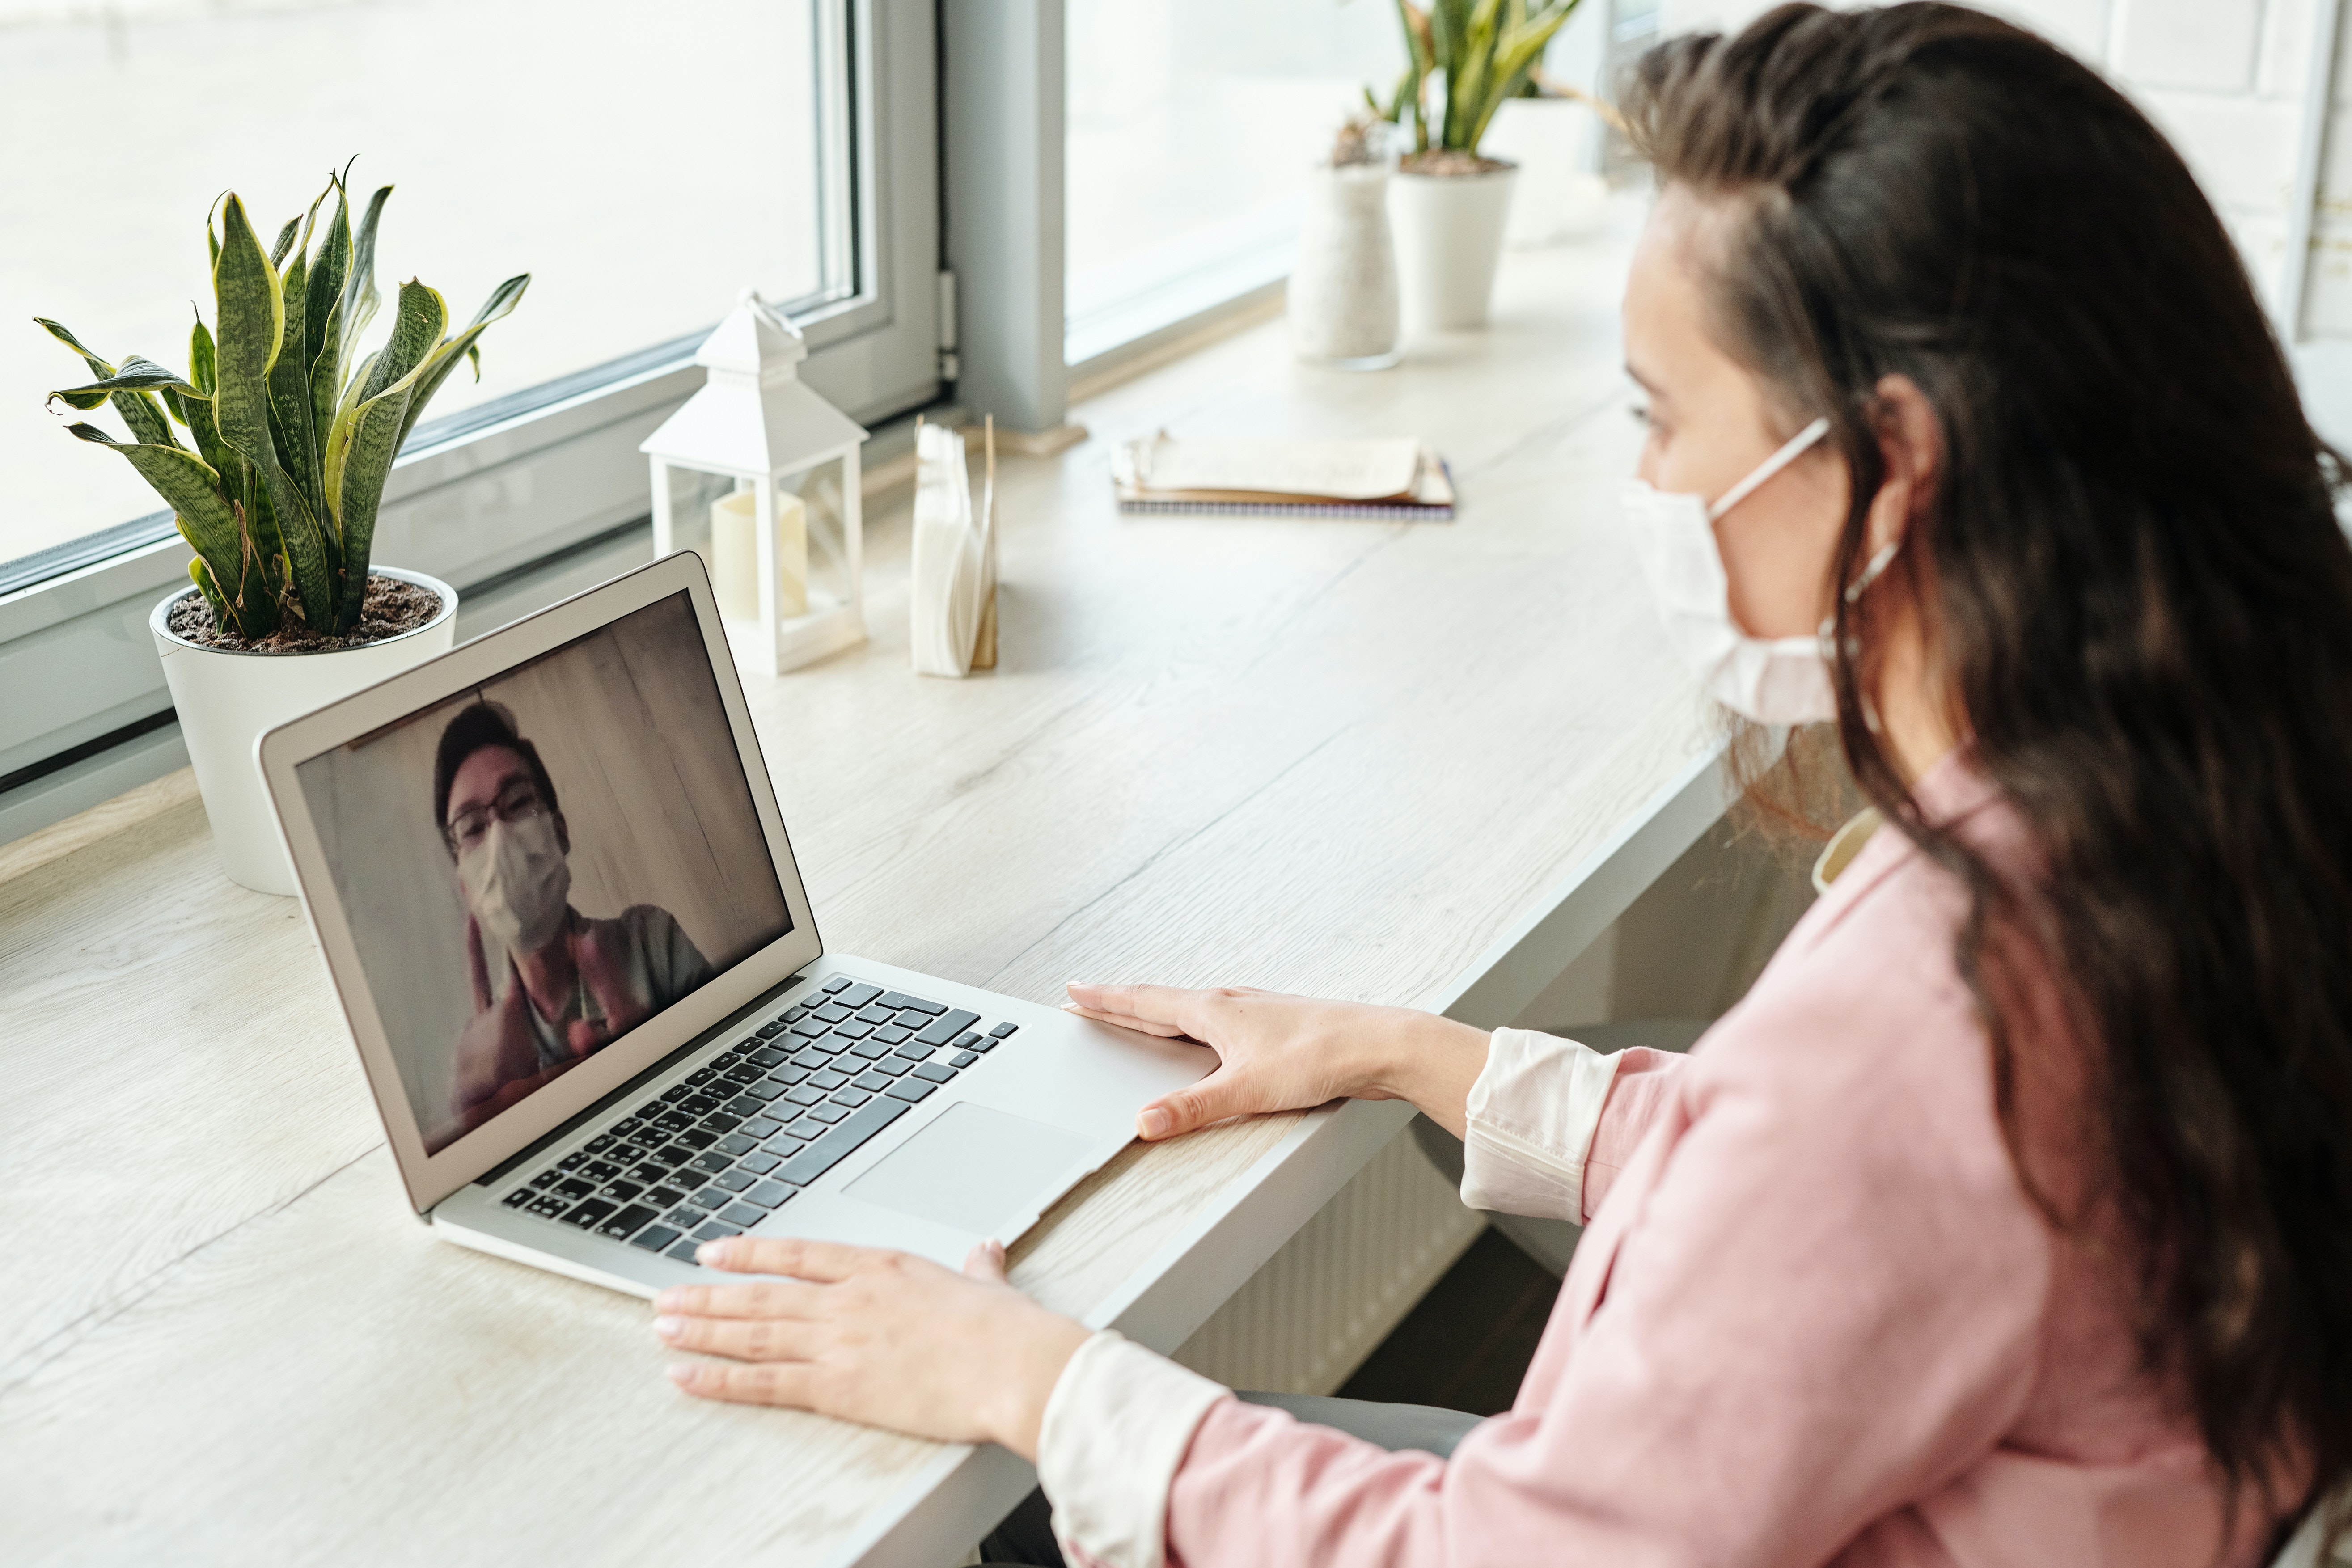 Image of a woman wearing a facemask and sitting on a desk, with her laptop on a video call with someone else with a facemask.